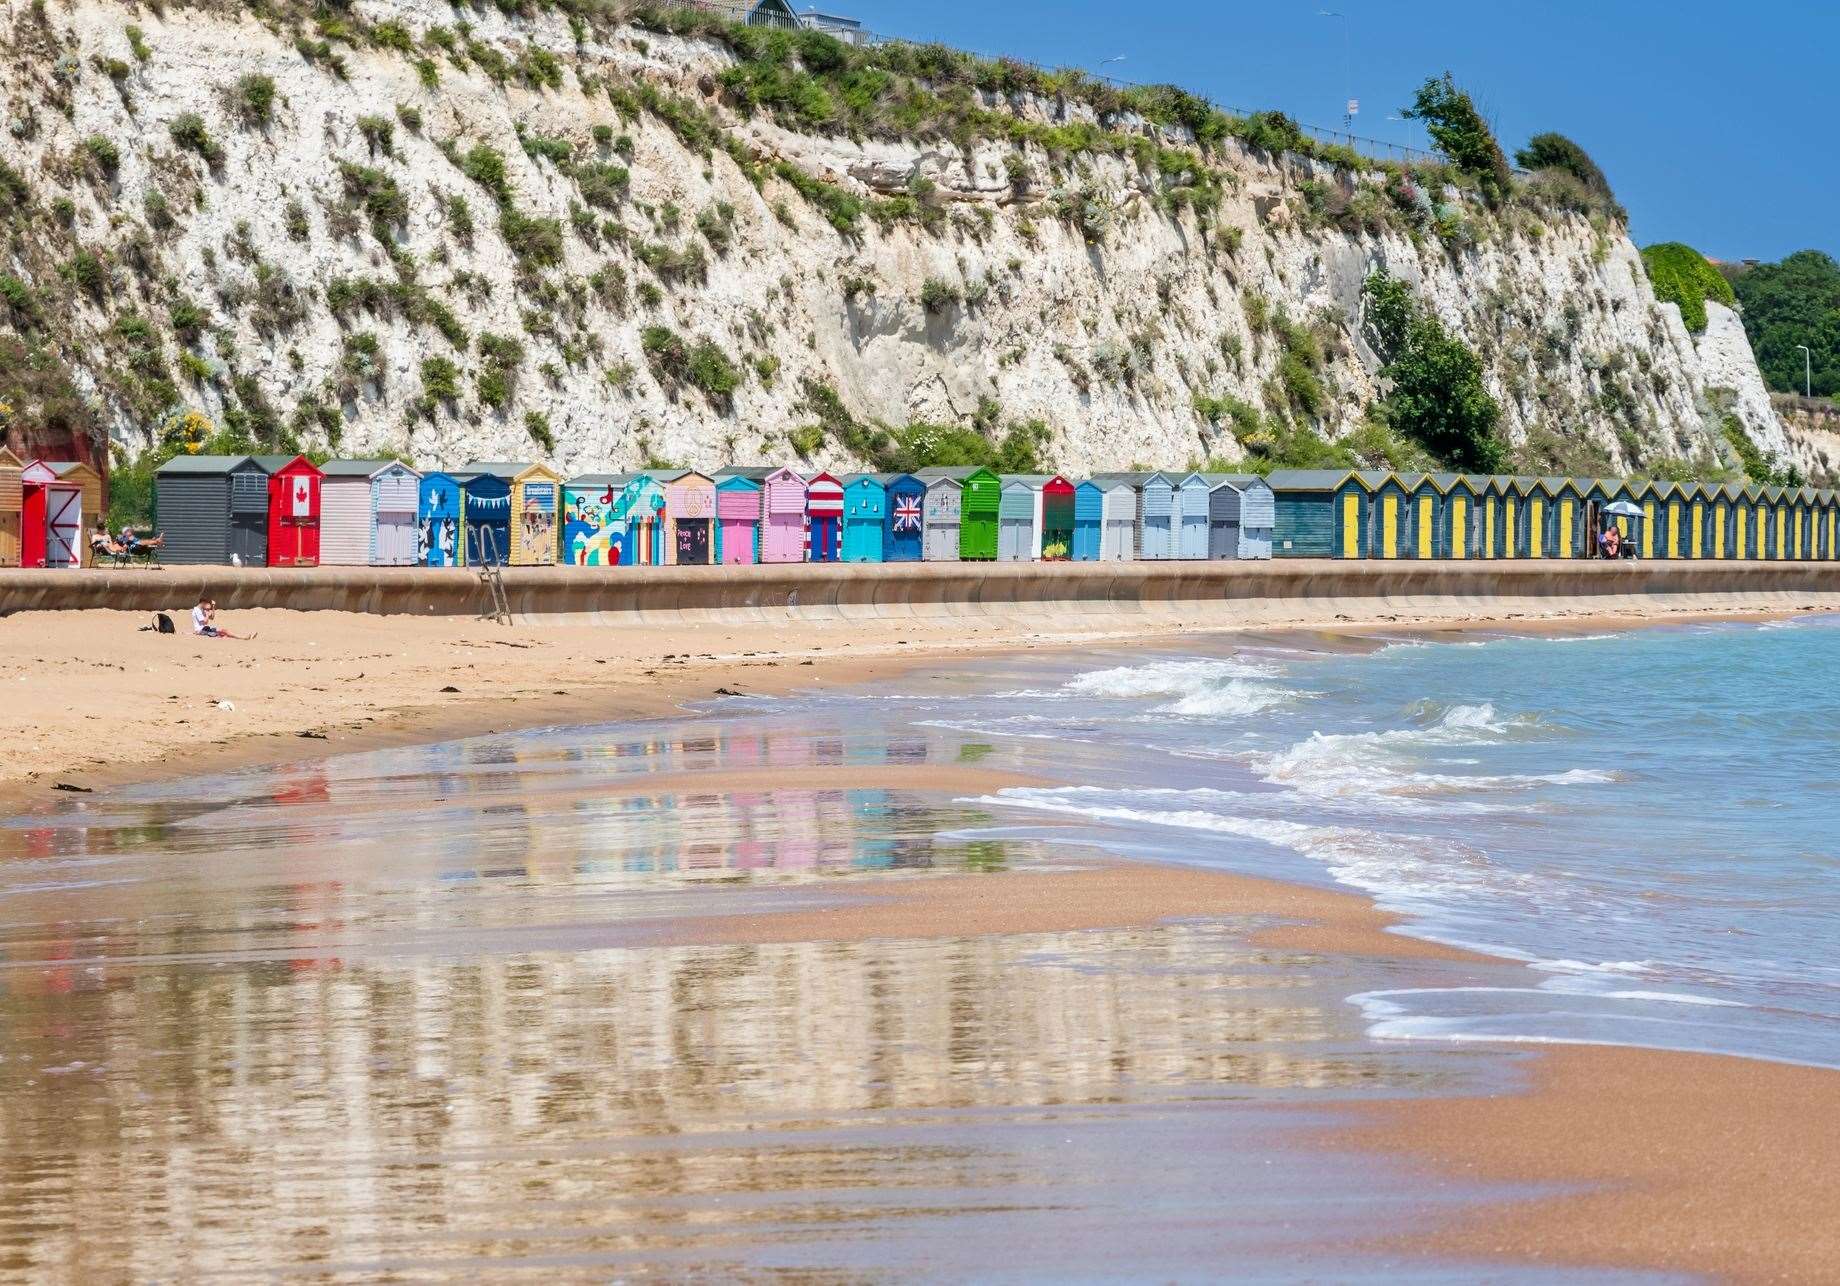 Broadstairs, in Thanet, which is Kent’s hotspot for second homes